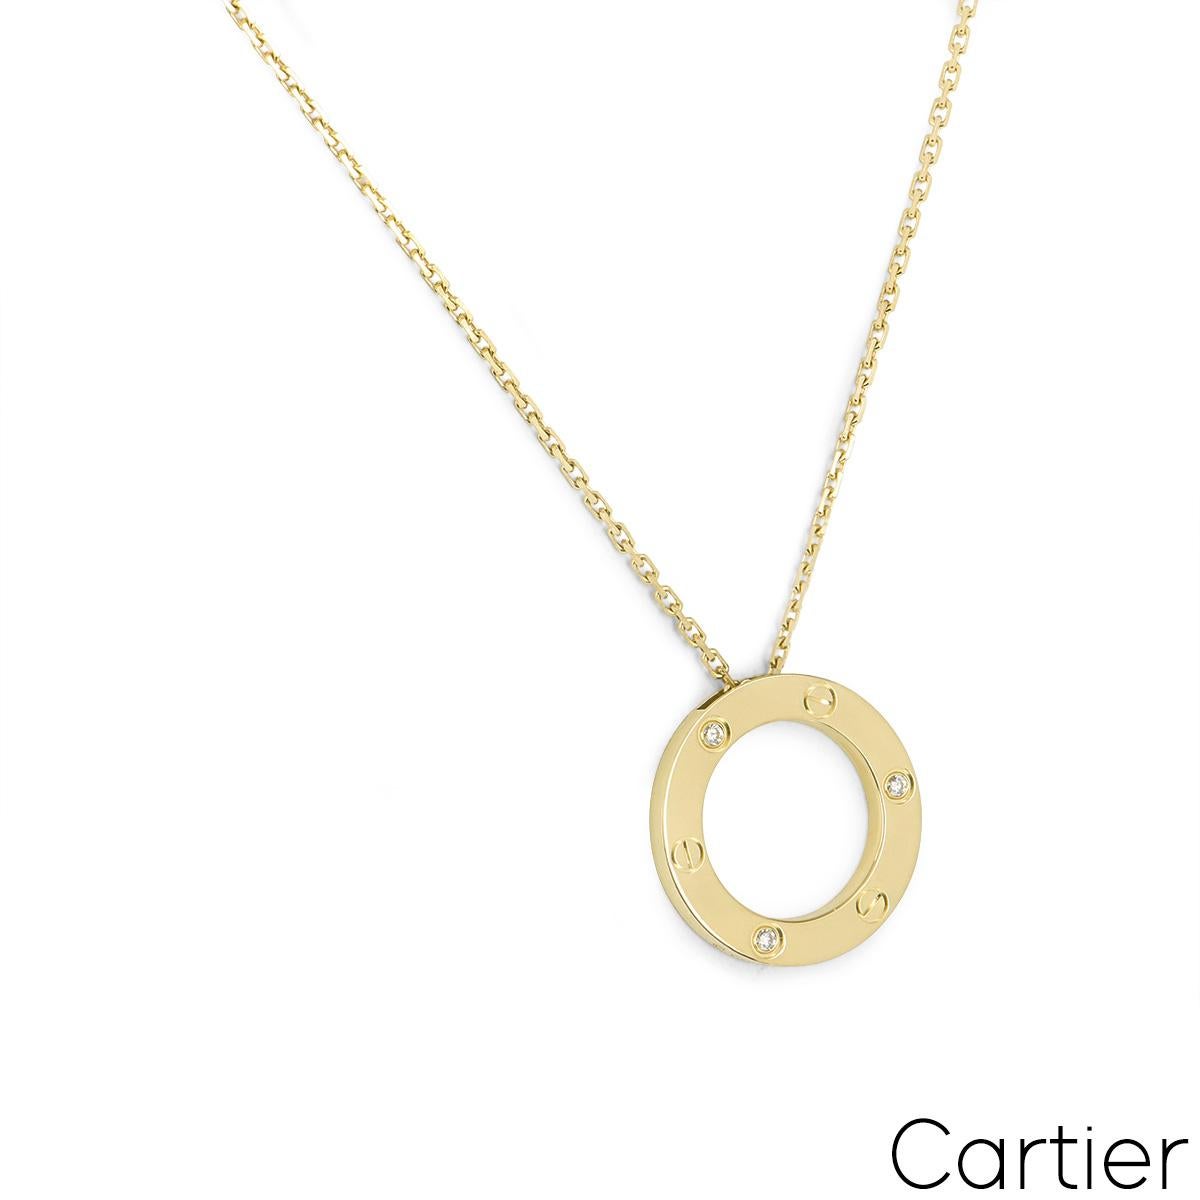 An 18k yellow gold diamond pendant by Cartier from the Love collection. The pendant is comprises of an open circular motif, set with 3 round brilliant cut diamonds totalling 0.07ct and alternating between the iconic screws. On the reverse of the